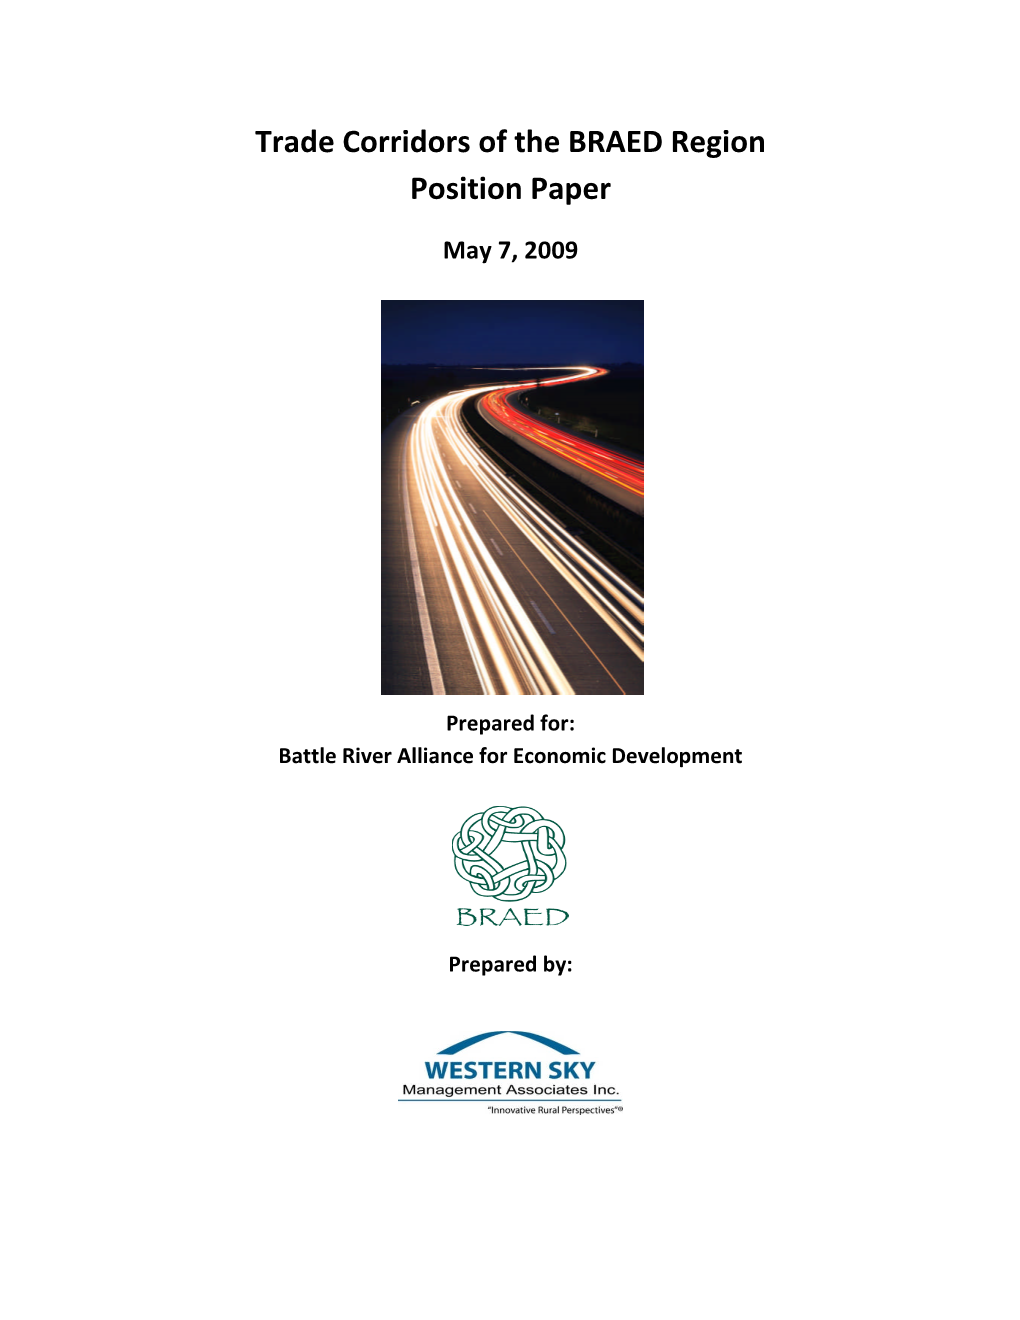 Trade Corridors of the BRAED Region Position Paper